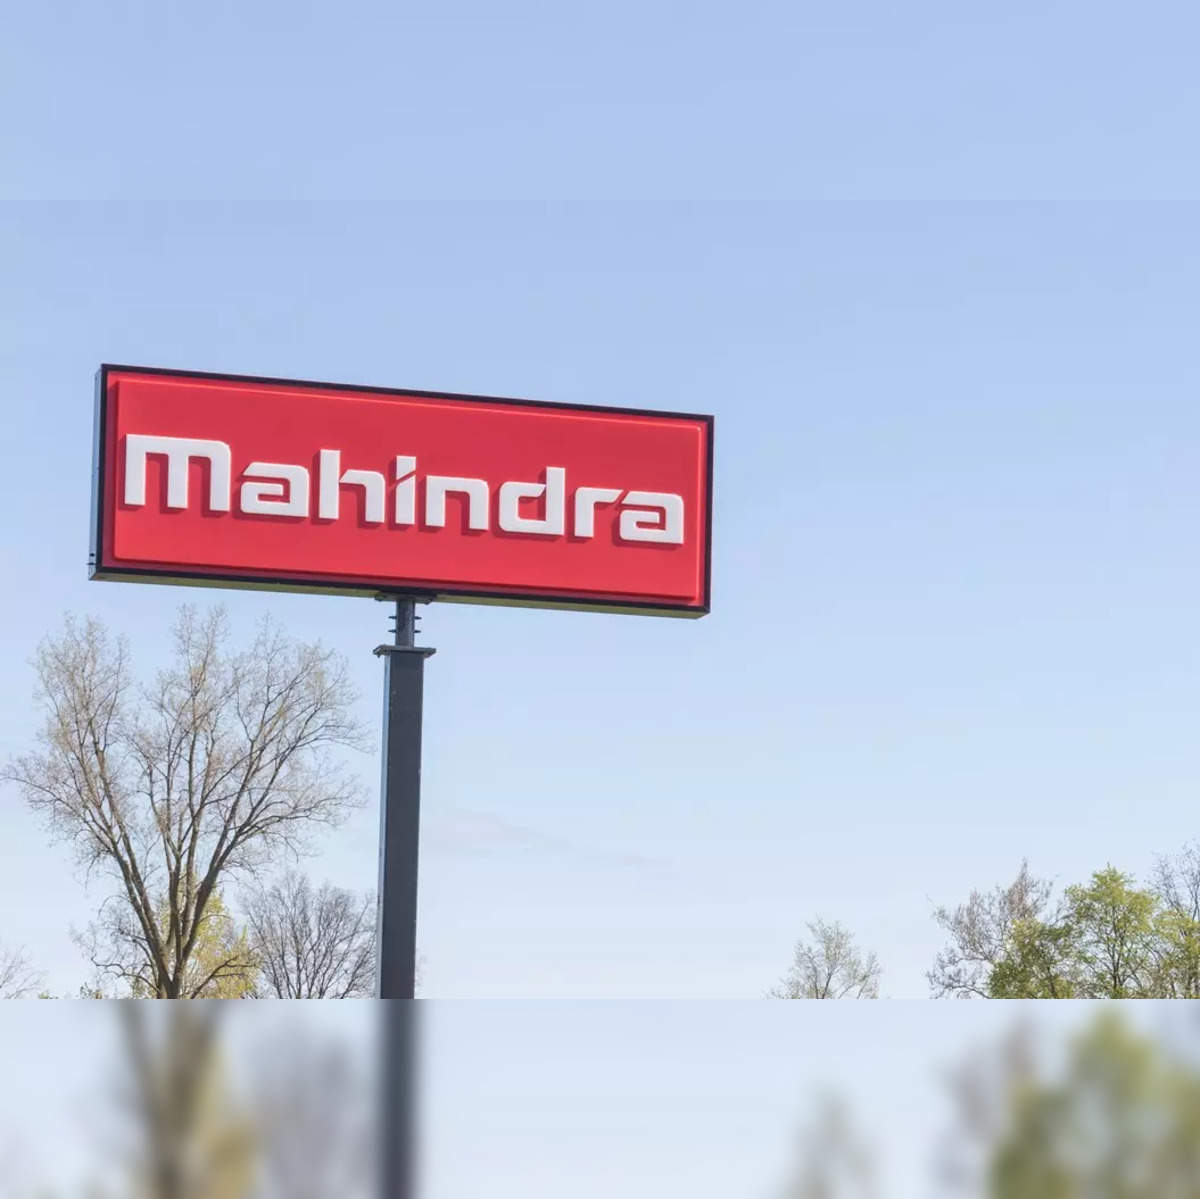 Mahindra new logo stickers in custom colors and sizes